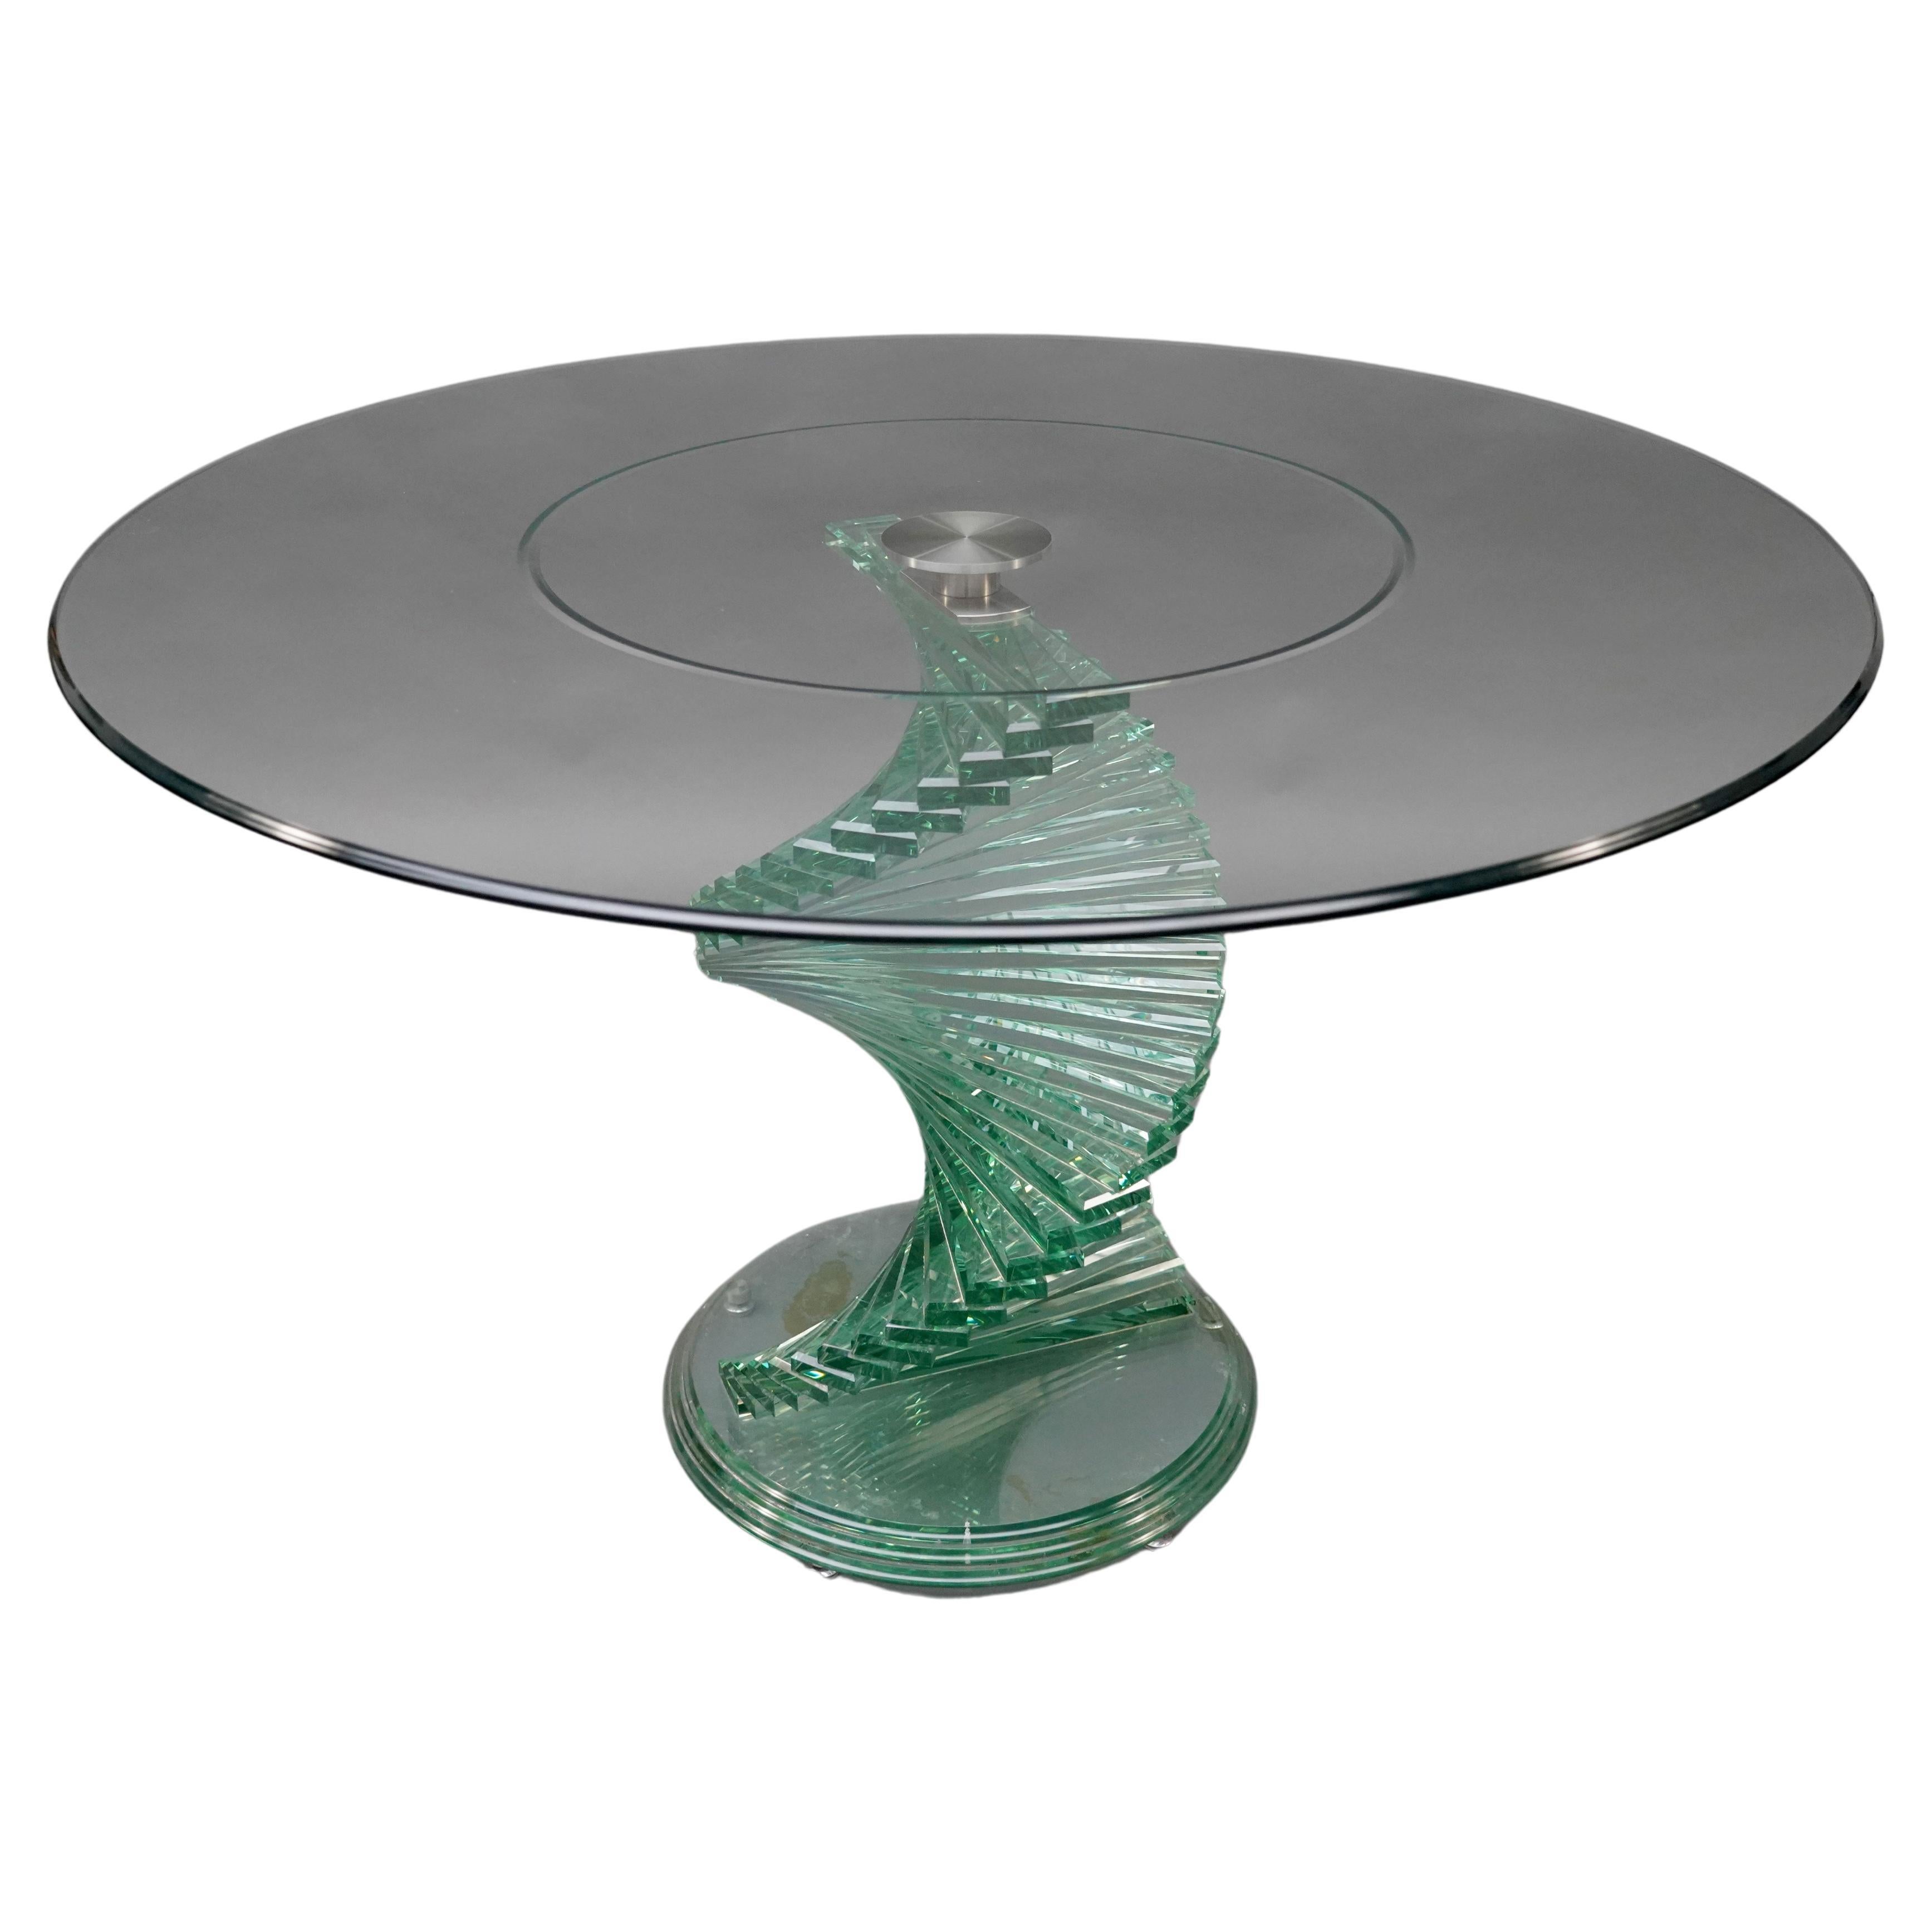 "Helix Spiral Swivel" glass table, France, Circa 1980